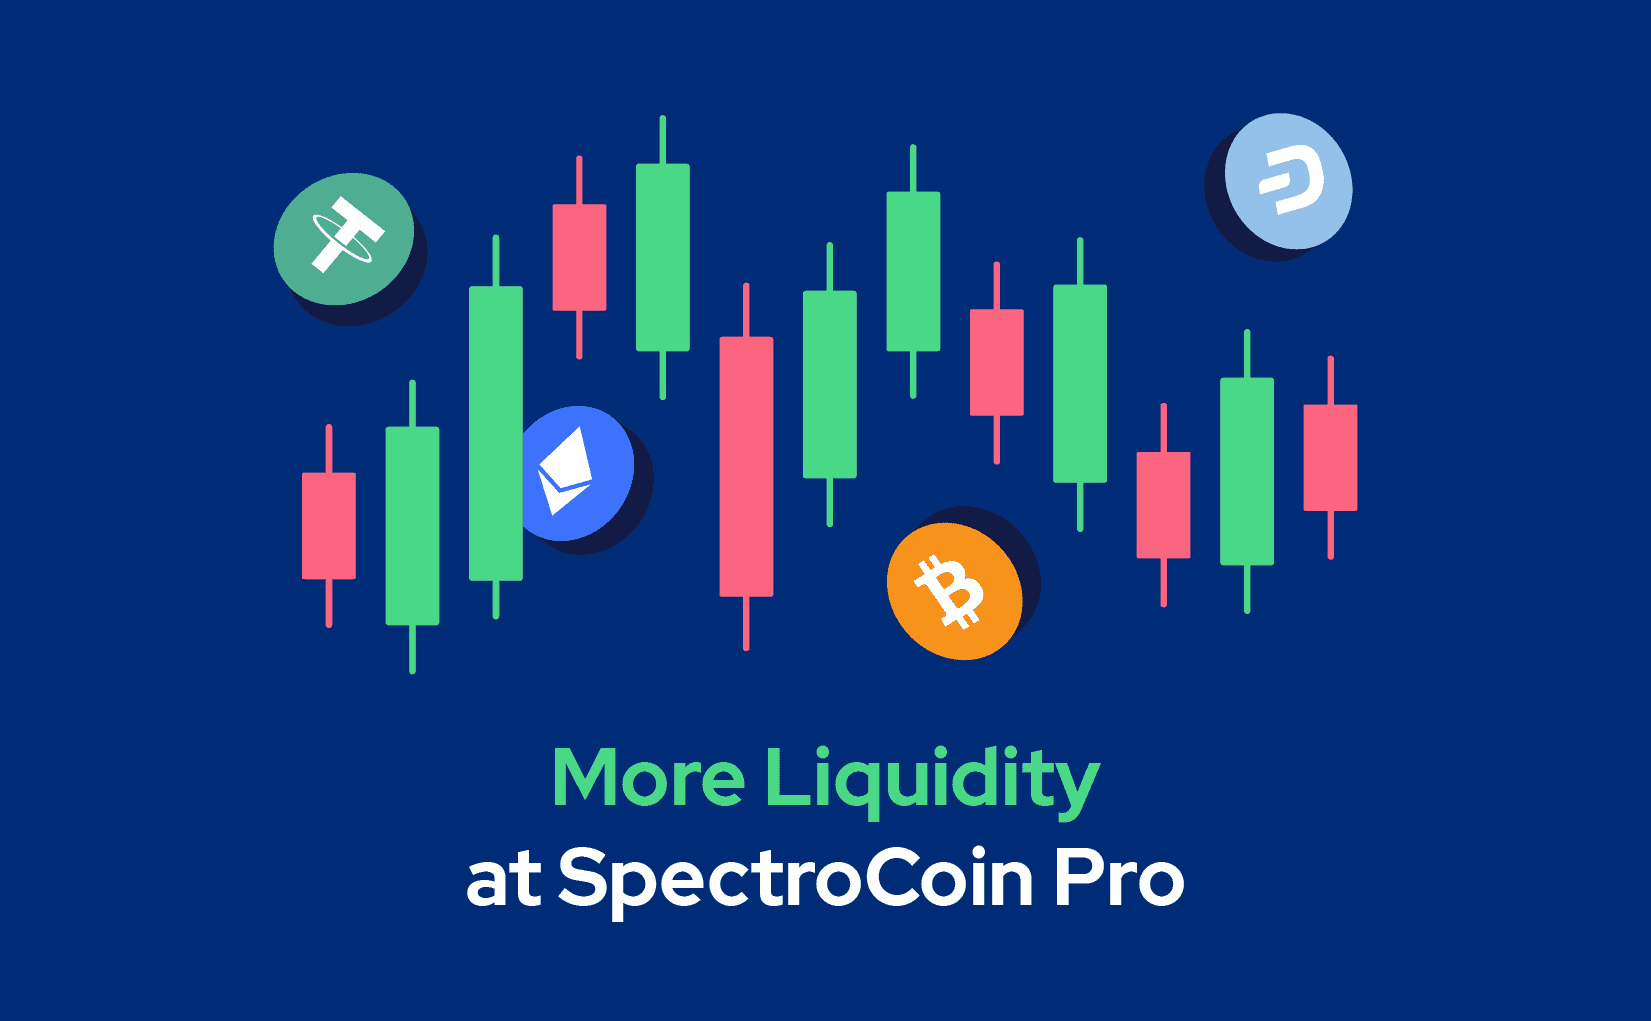 More Liquidity at SpectroCoin Pro